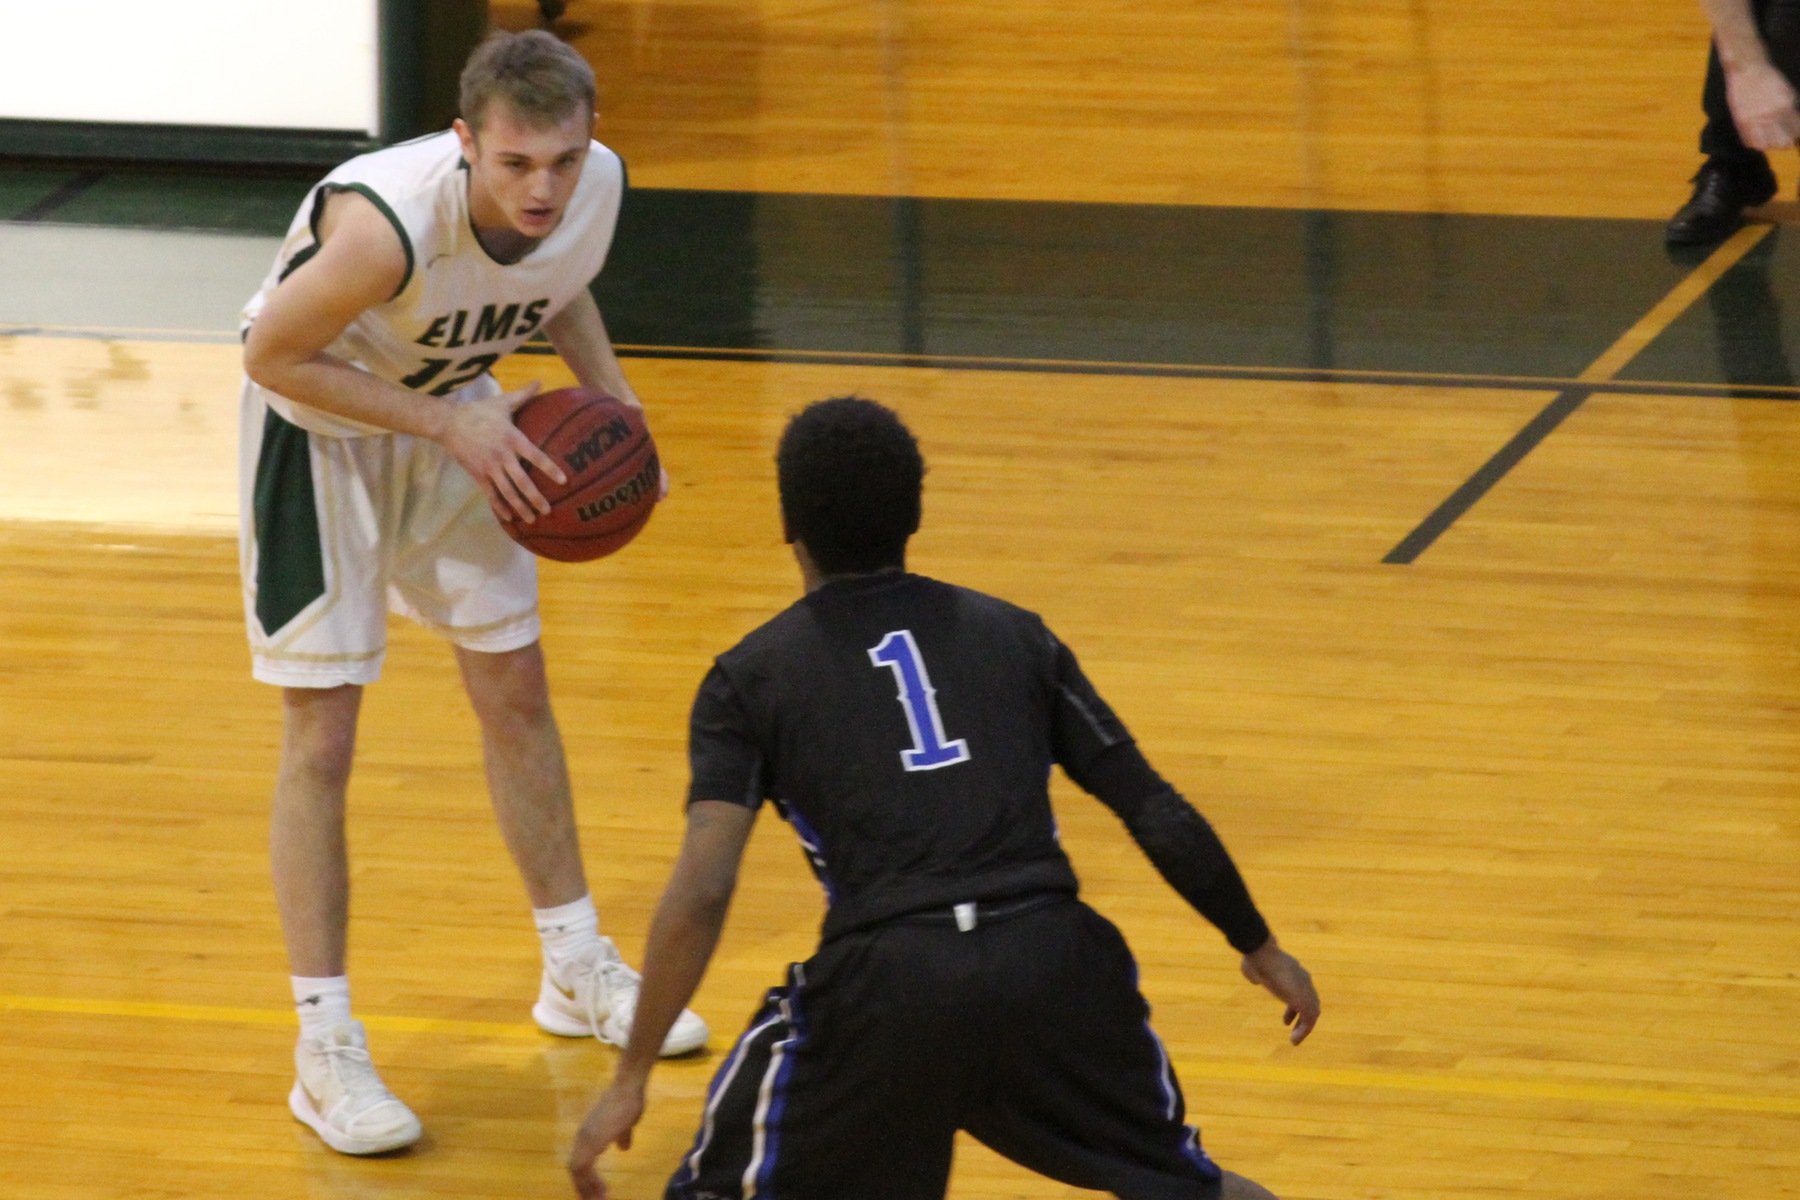 Ohradka's 29-Point Outburst Paces Men's Hoops To Victory